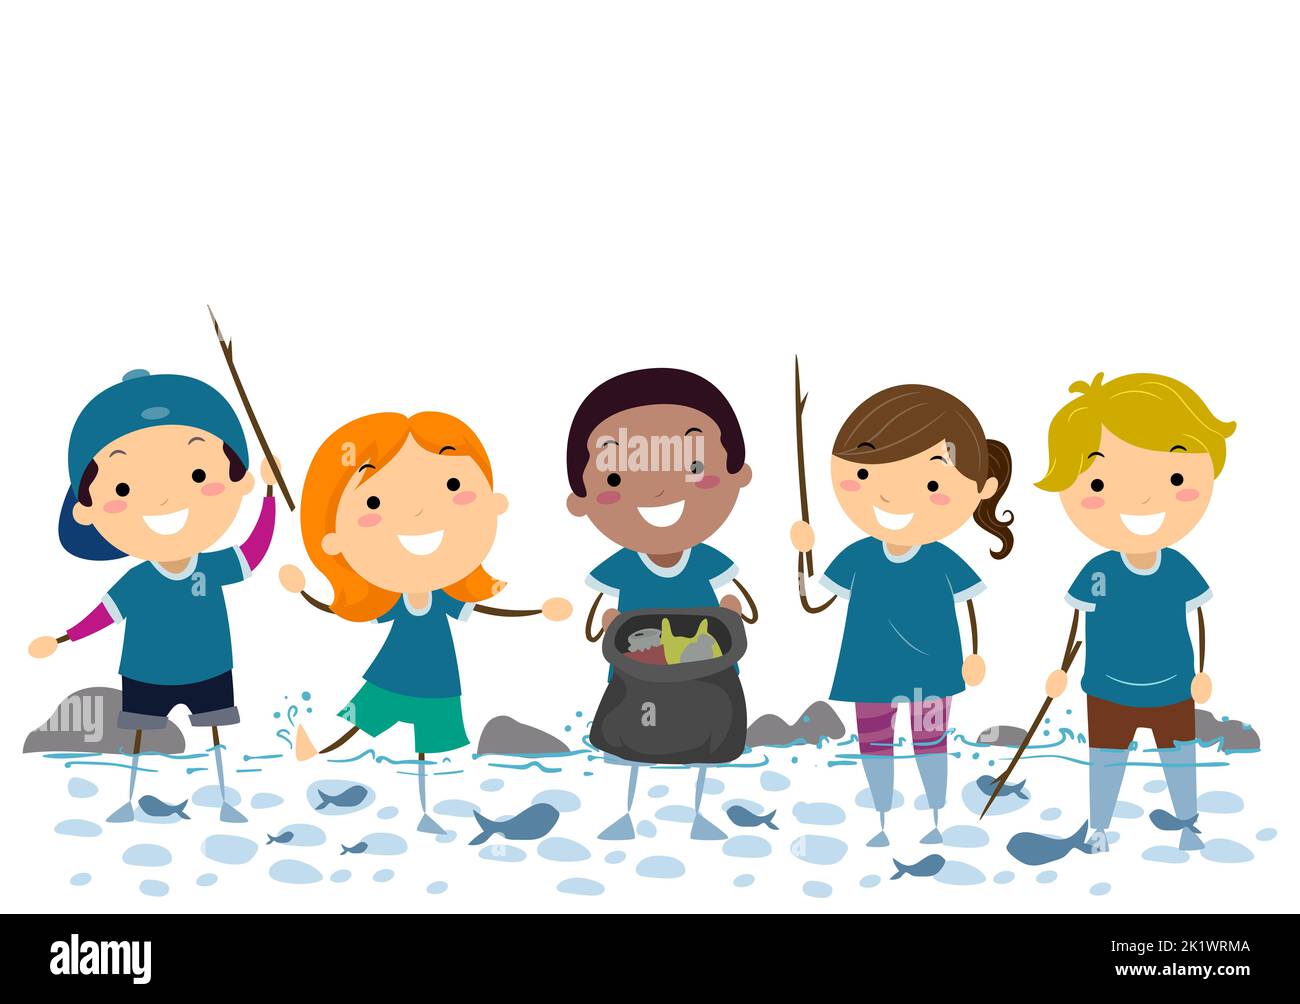 Illustration of Stickman Kids Volunteer Wearing Blue Shirt Clearing Stream from Trash Stock Photo